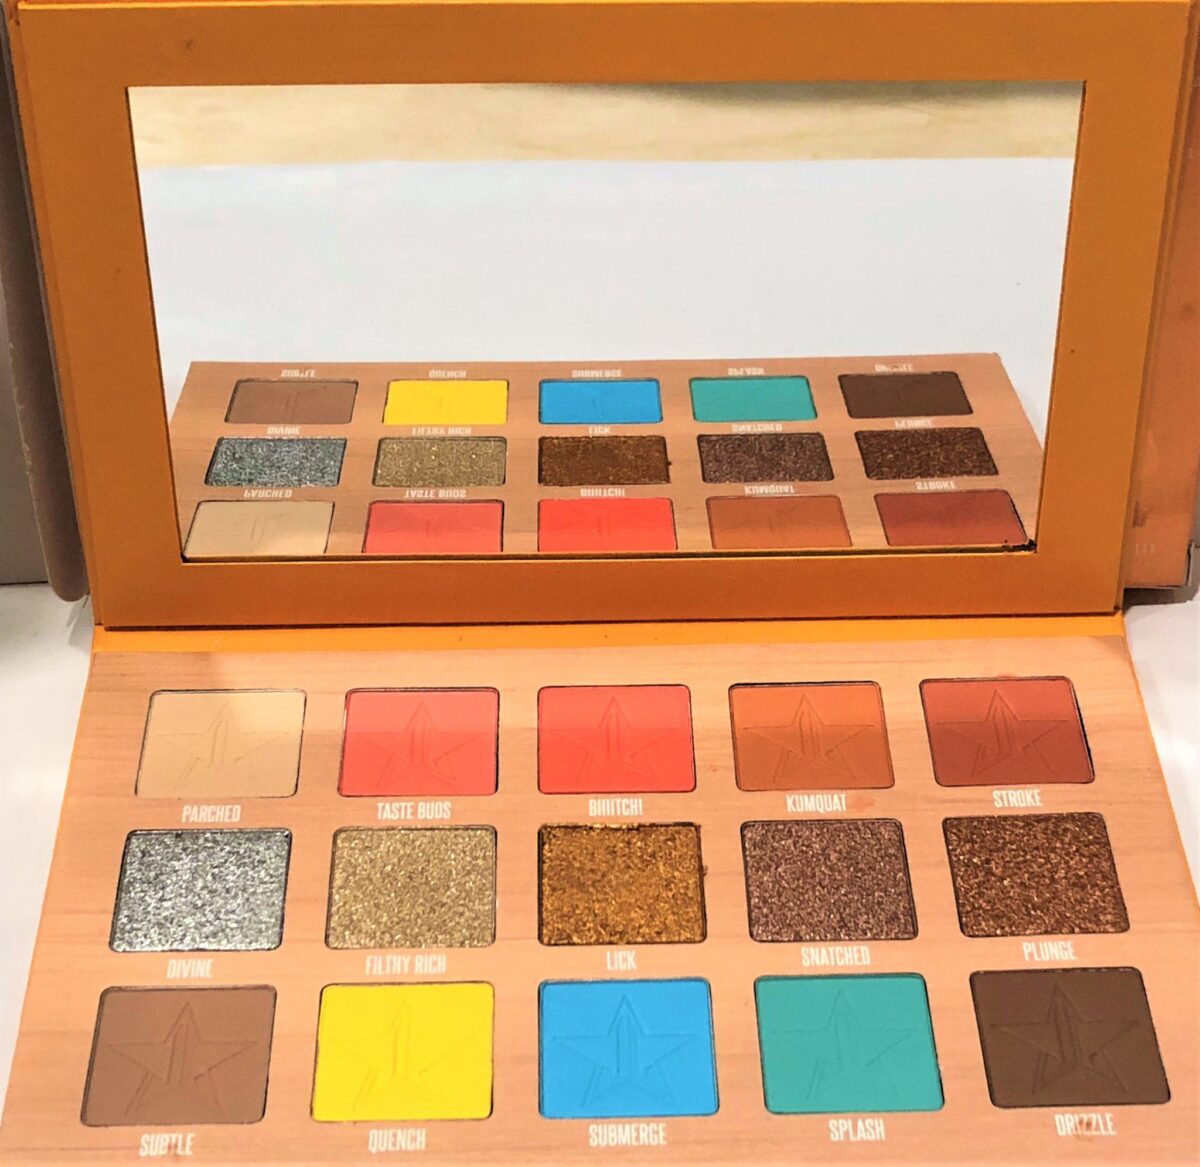 JEFFREE STAR THIRSTY EYESHADOW PALETTE INCLUDED IS A HUGE MIRROR AND 15 PANS OF VIBRANT EYESHADOWS